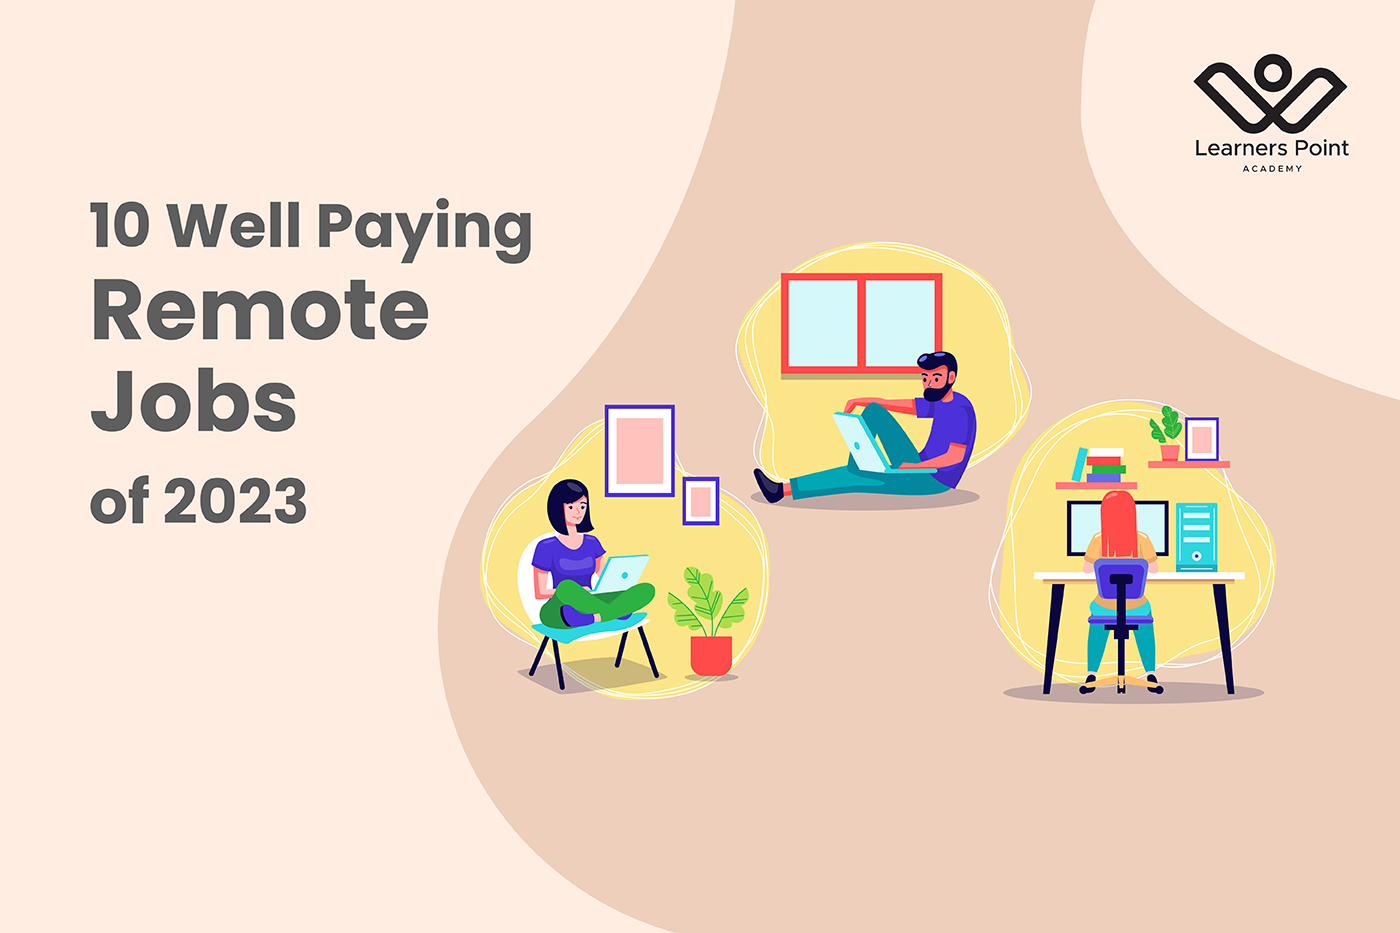 10 Well Paying Remote Jobs of 2023